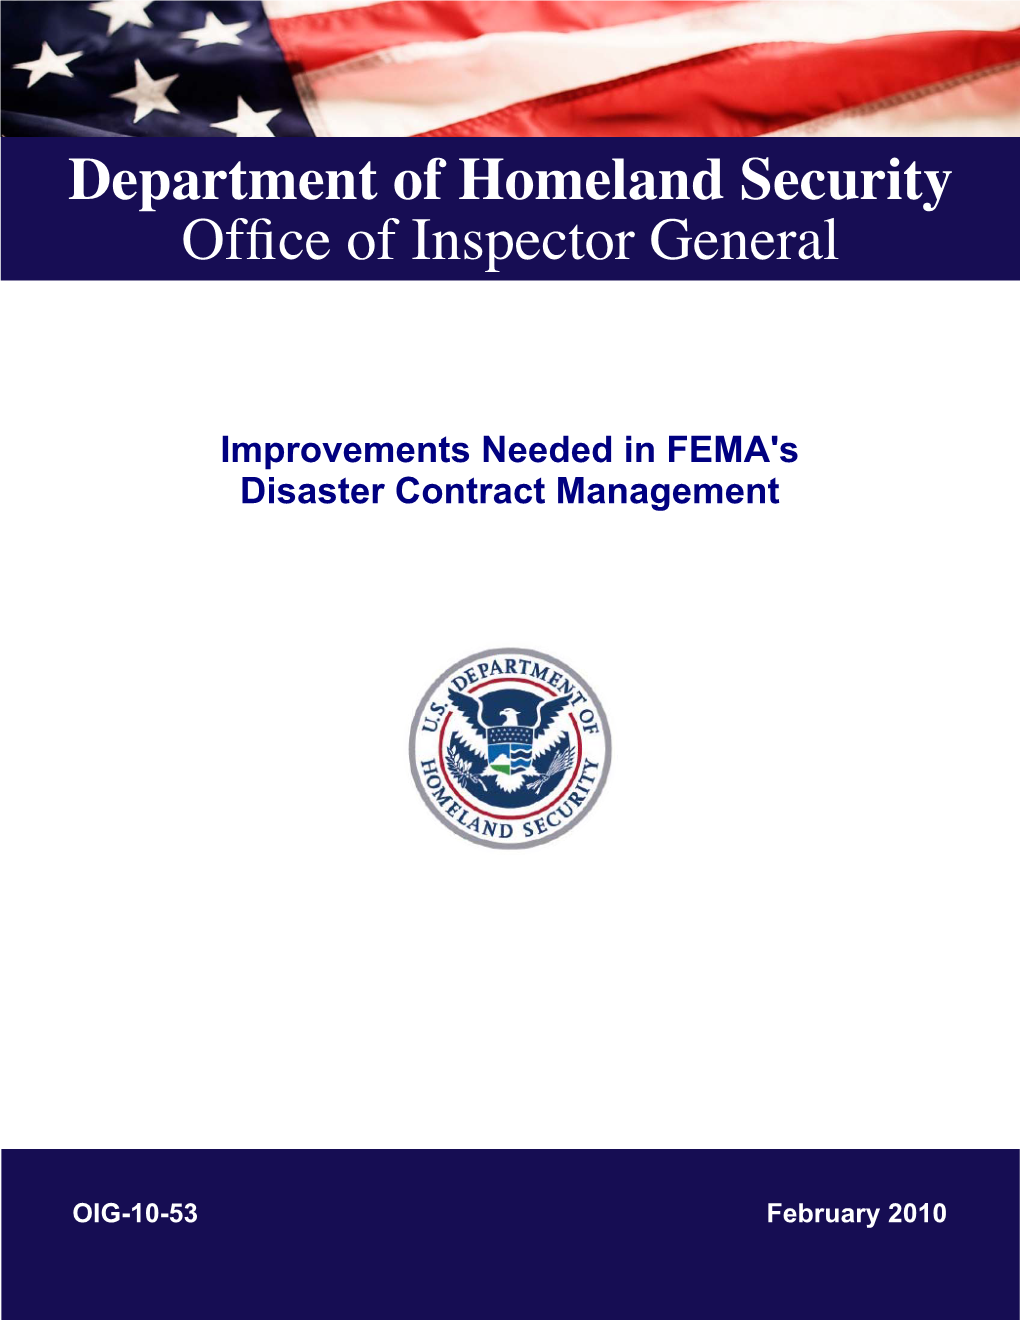 Improvements Needed in FEMA's Disaster Contract Management